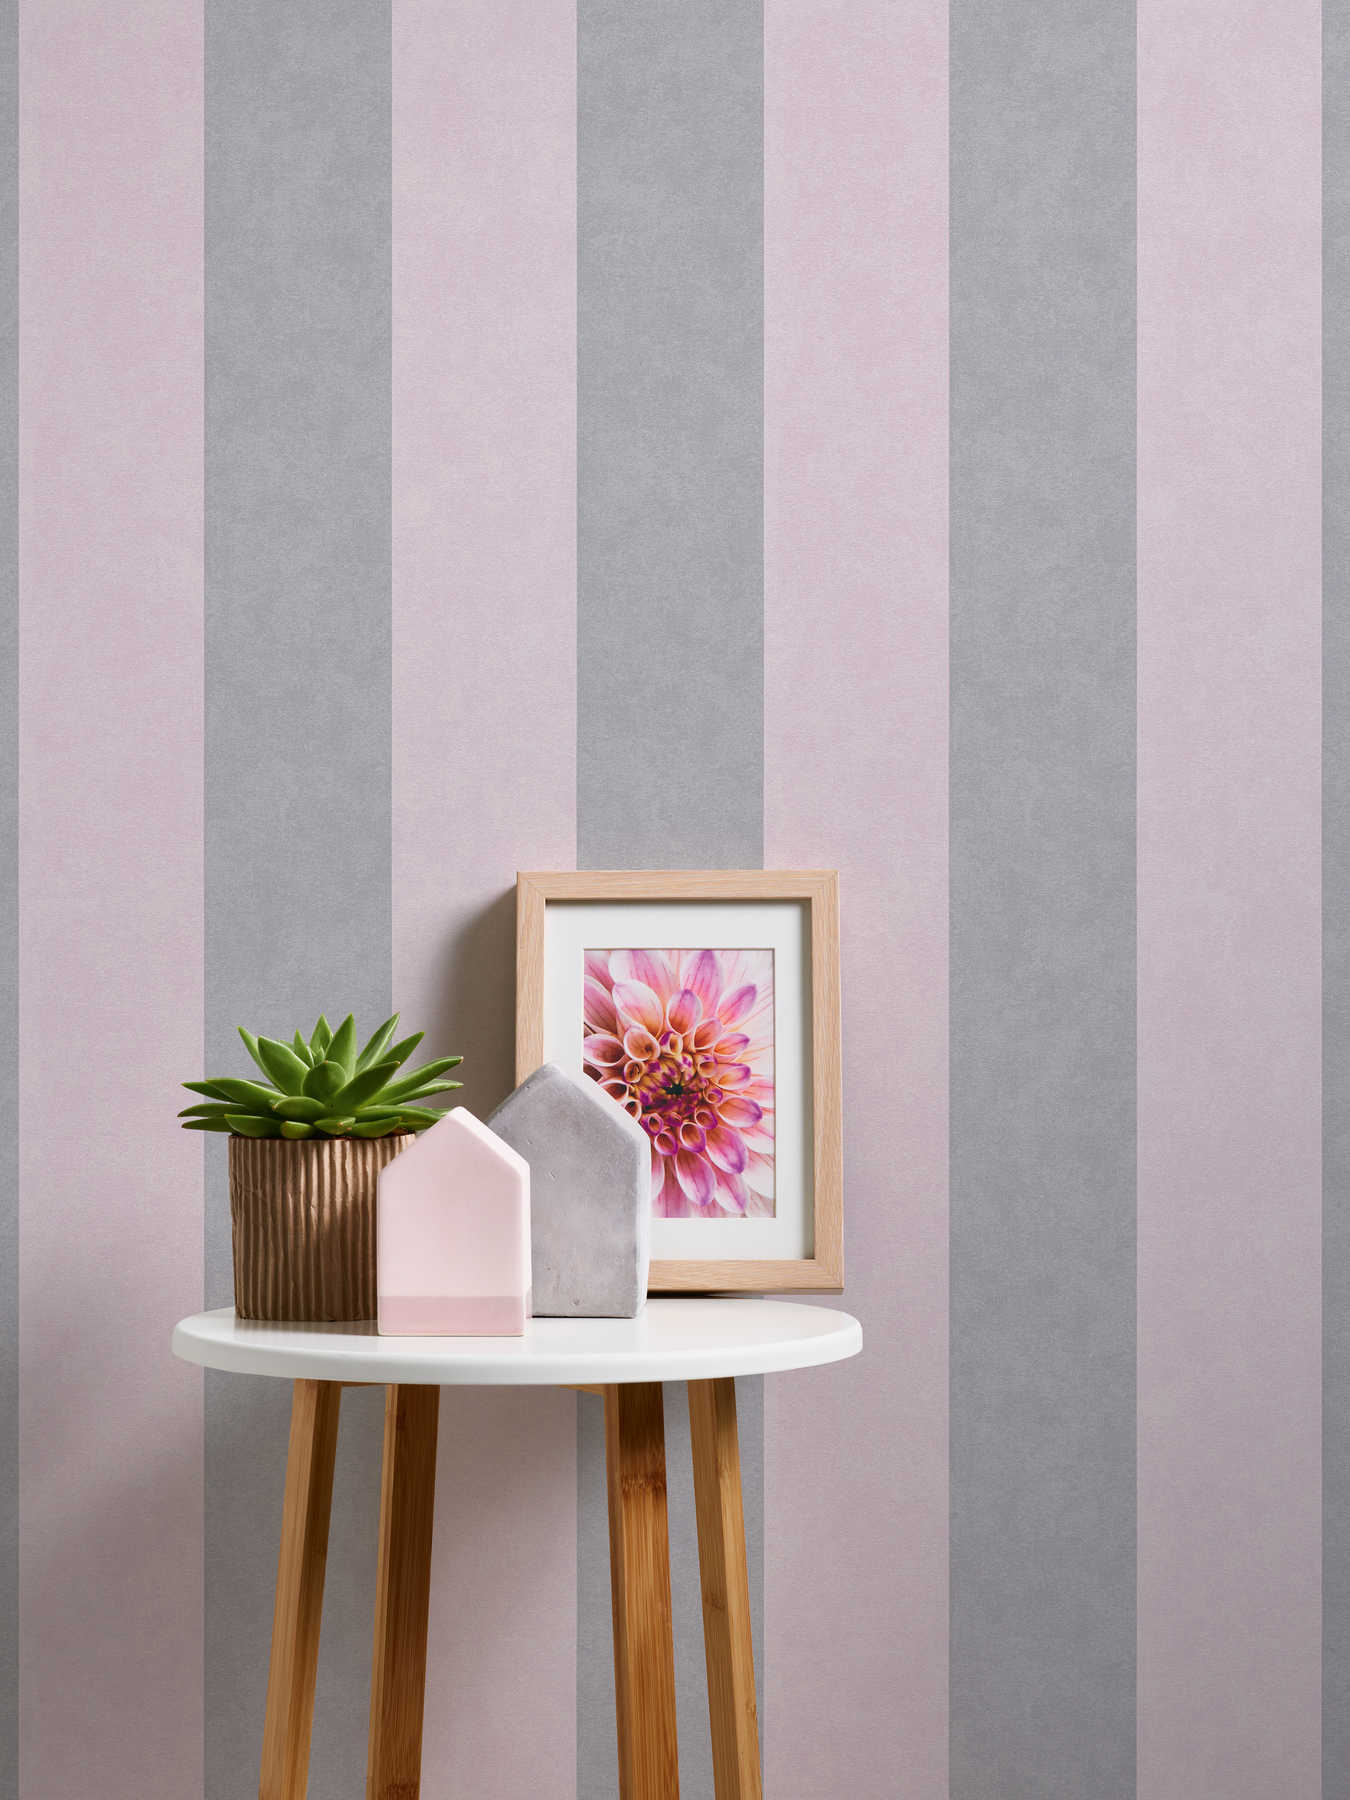             Striped wallpaper with texture pattern - grey, pink
        